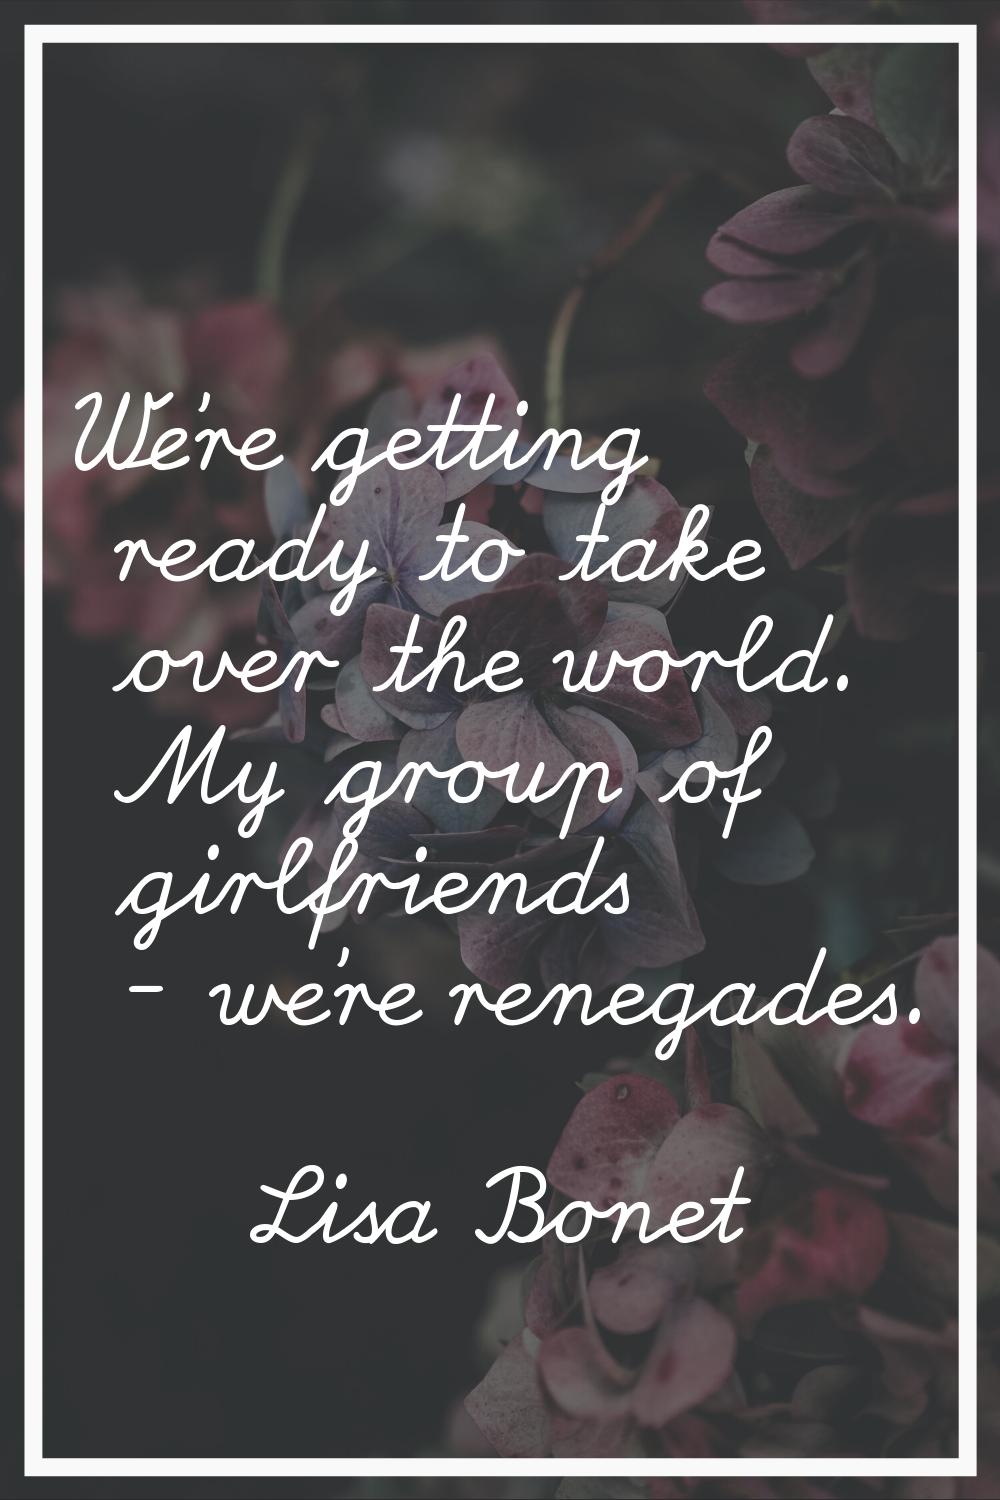 We're getting ready to take over the world. My group of girlfriends - we're renegades.